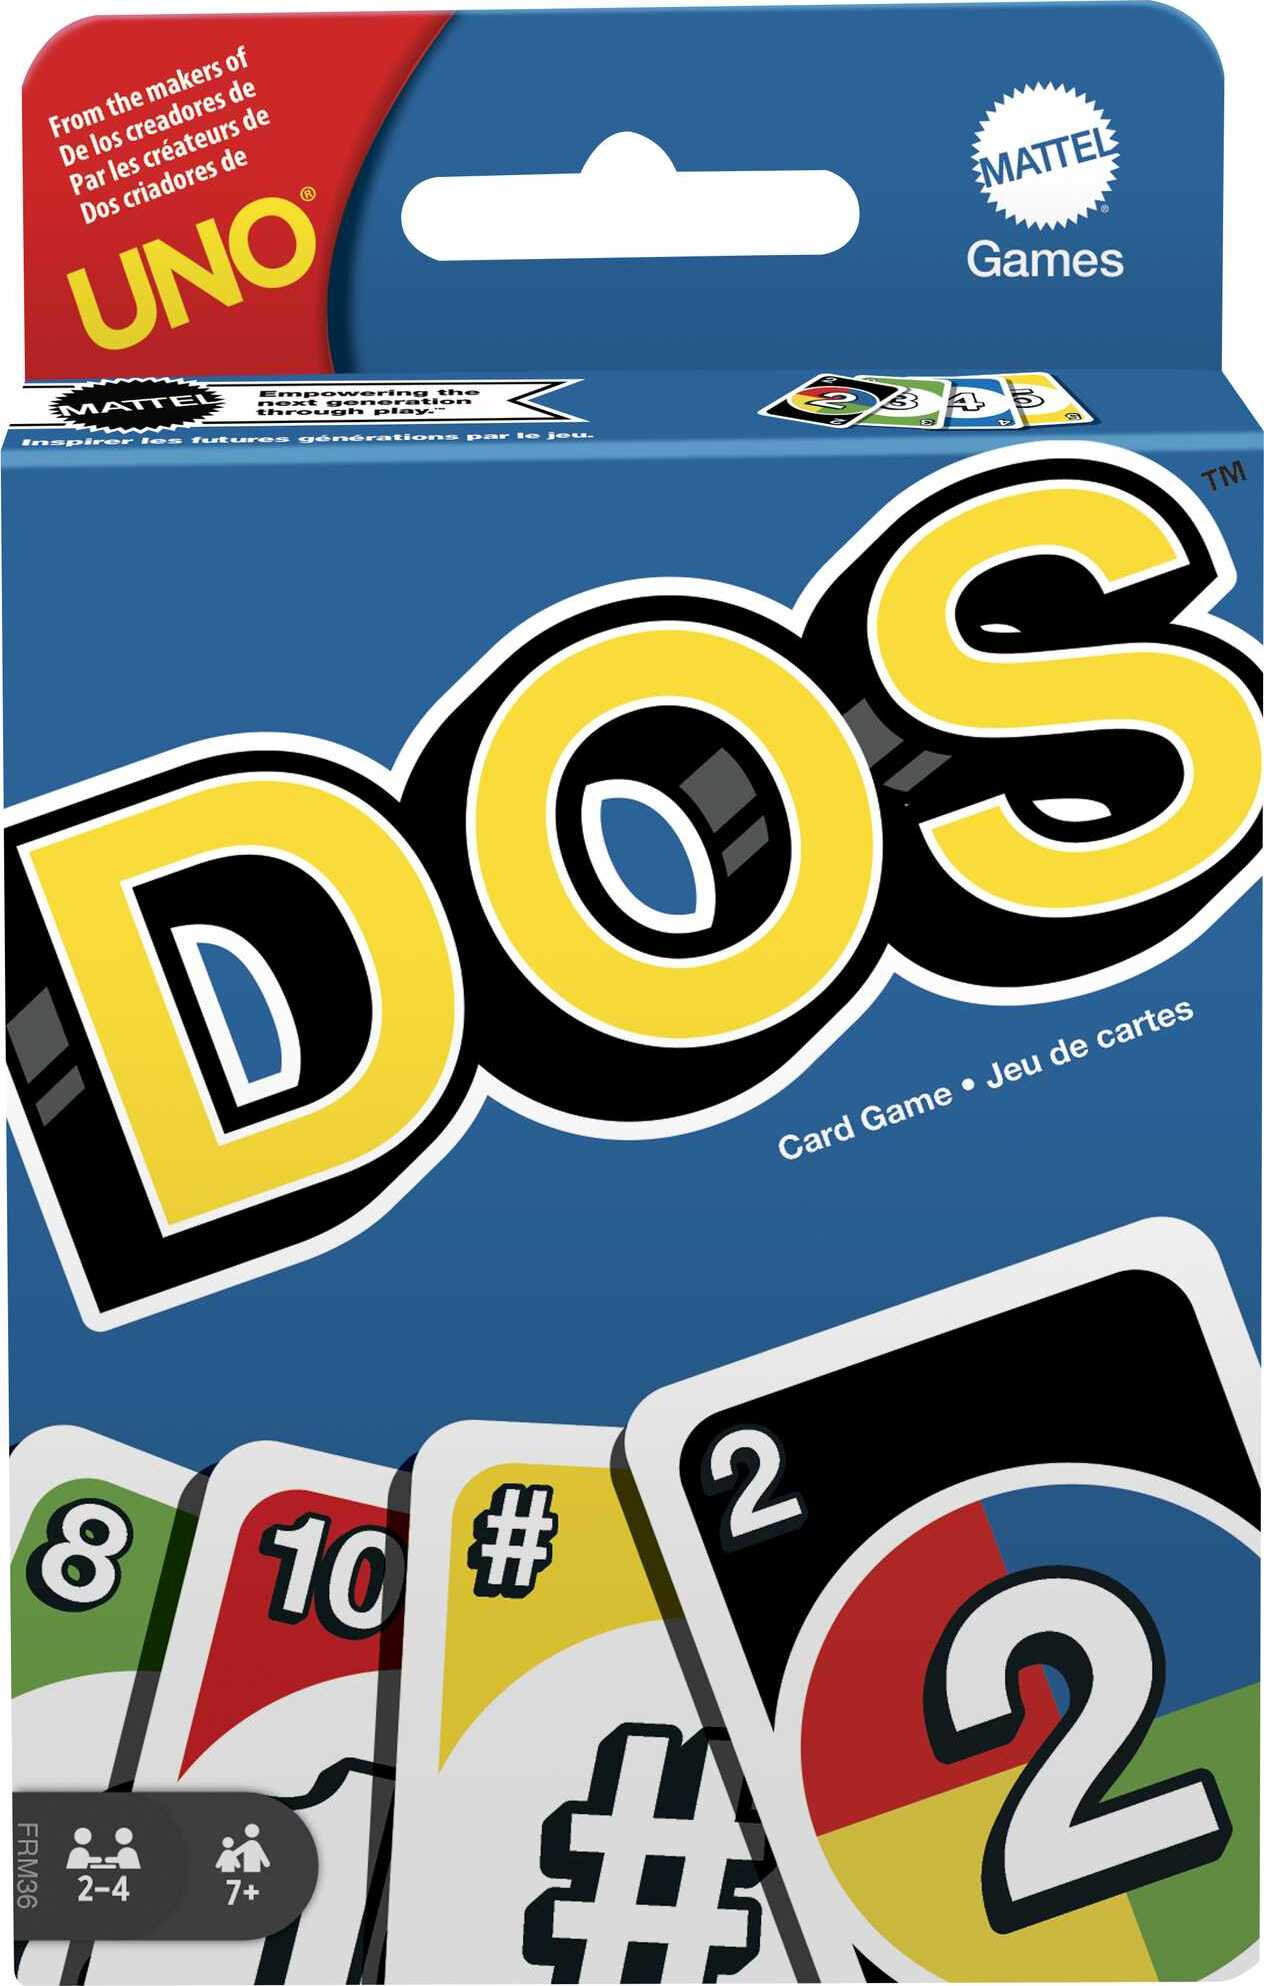 DOS Card Game for Family & Game Night from the Makers of UNO and Featuring Two Discard Piles - image 1 of 7